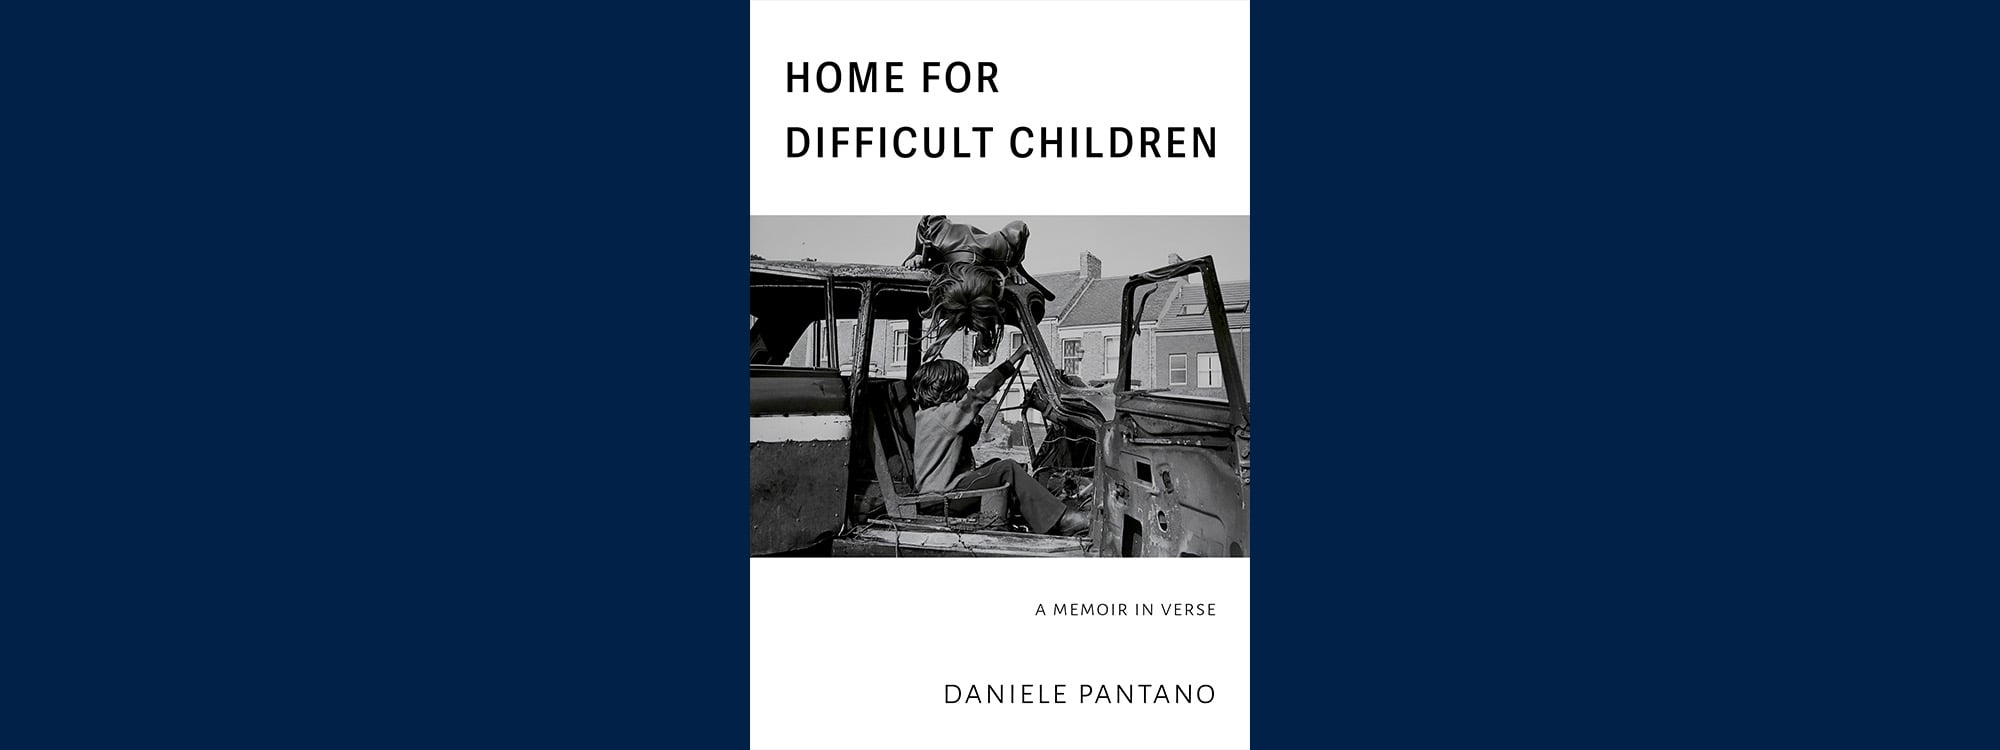 A book cover for Homes for Difficult Children. A black and white image on a white cover